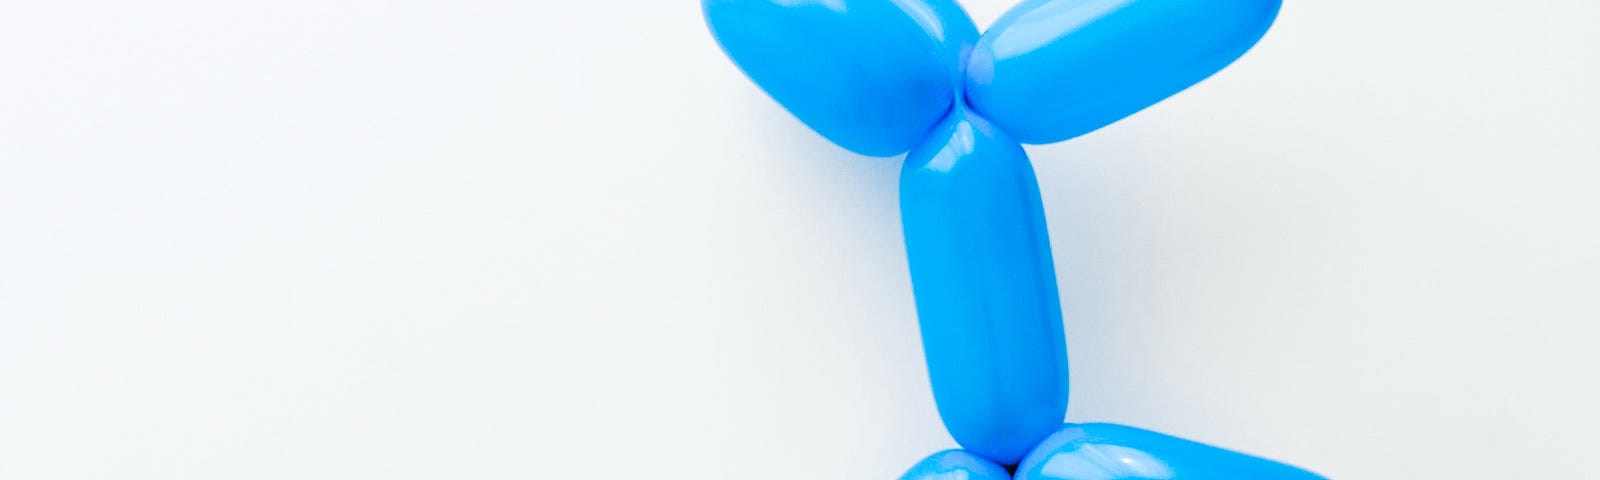 picture of a blue balloon twisted into a dog shape